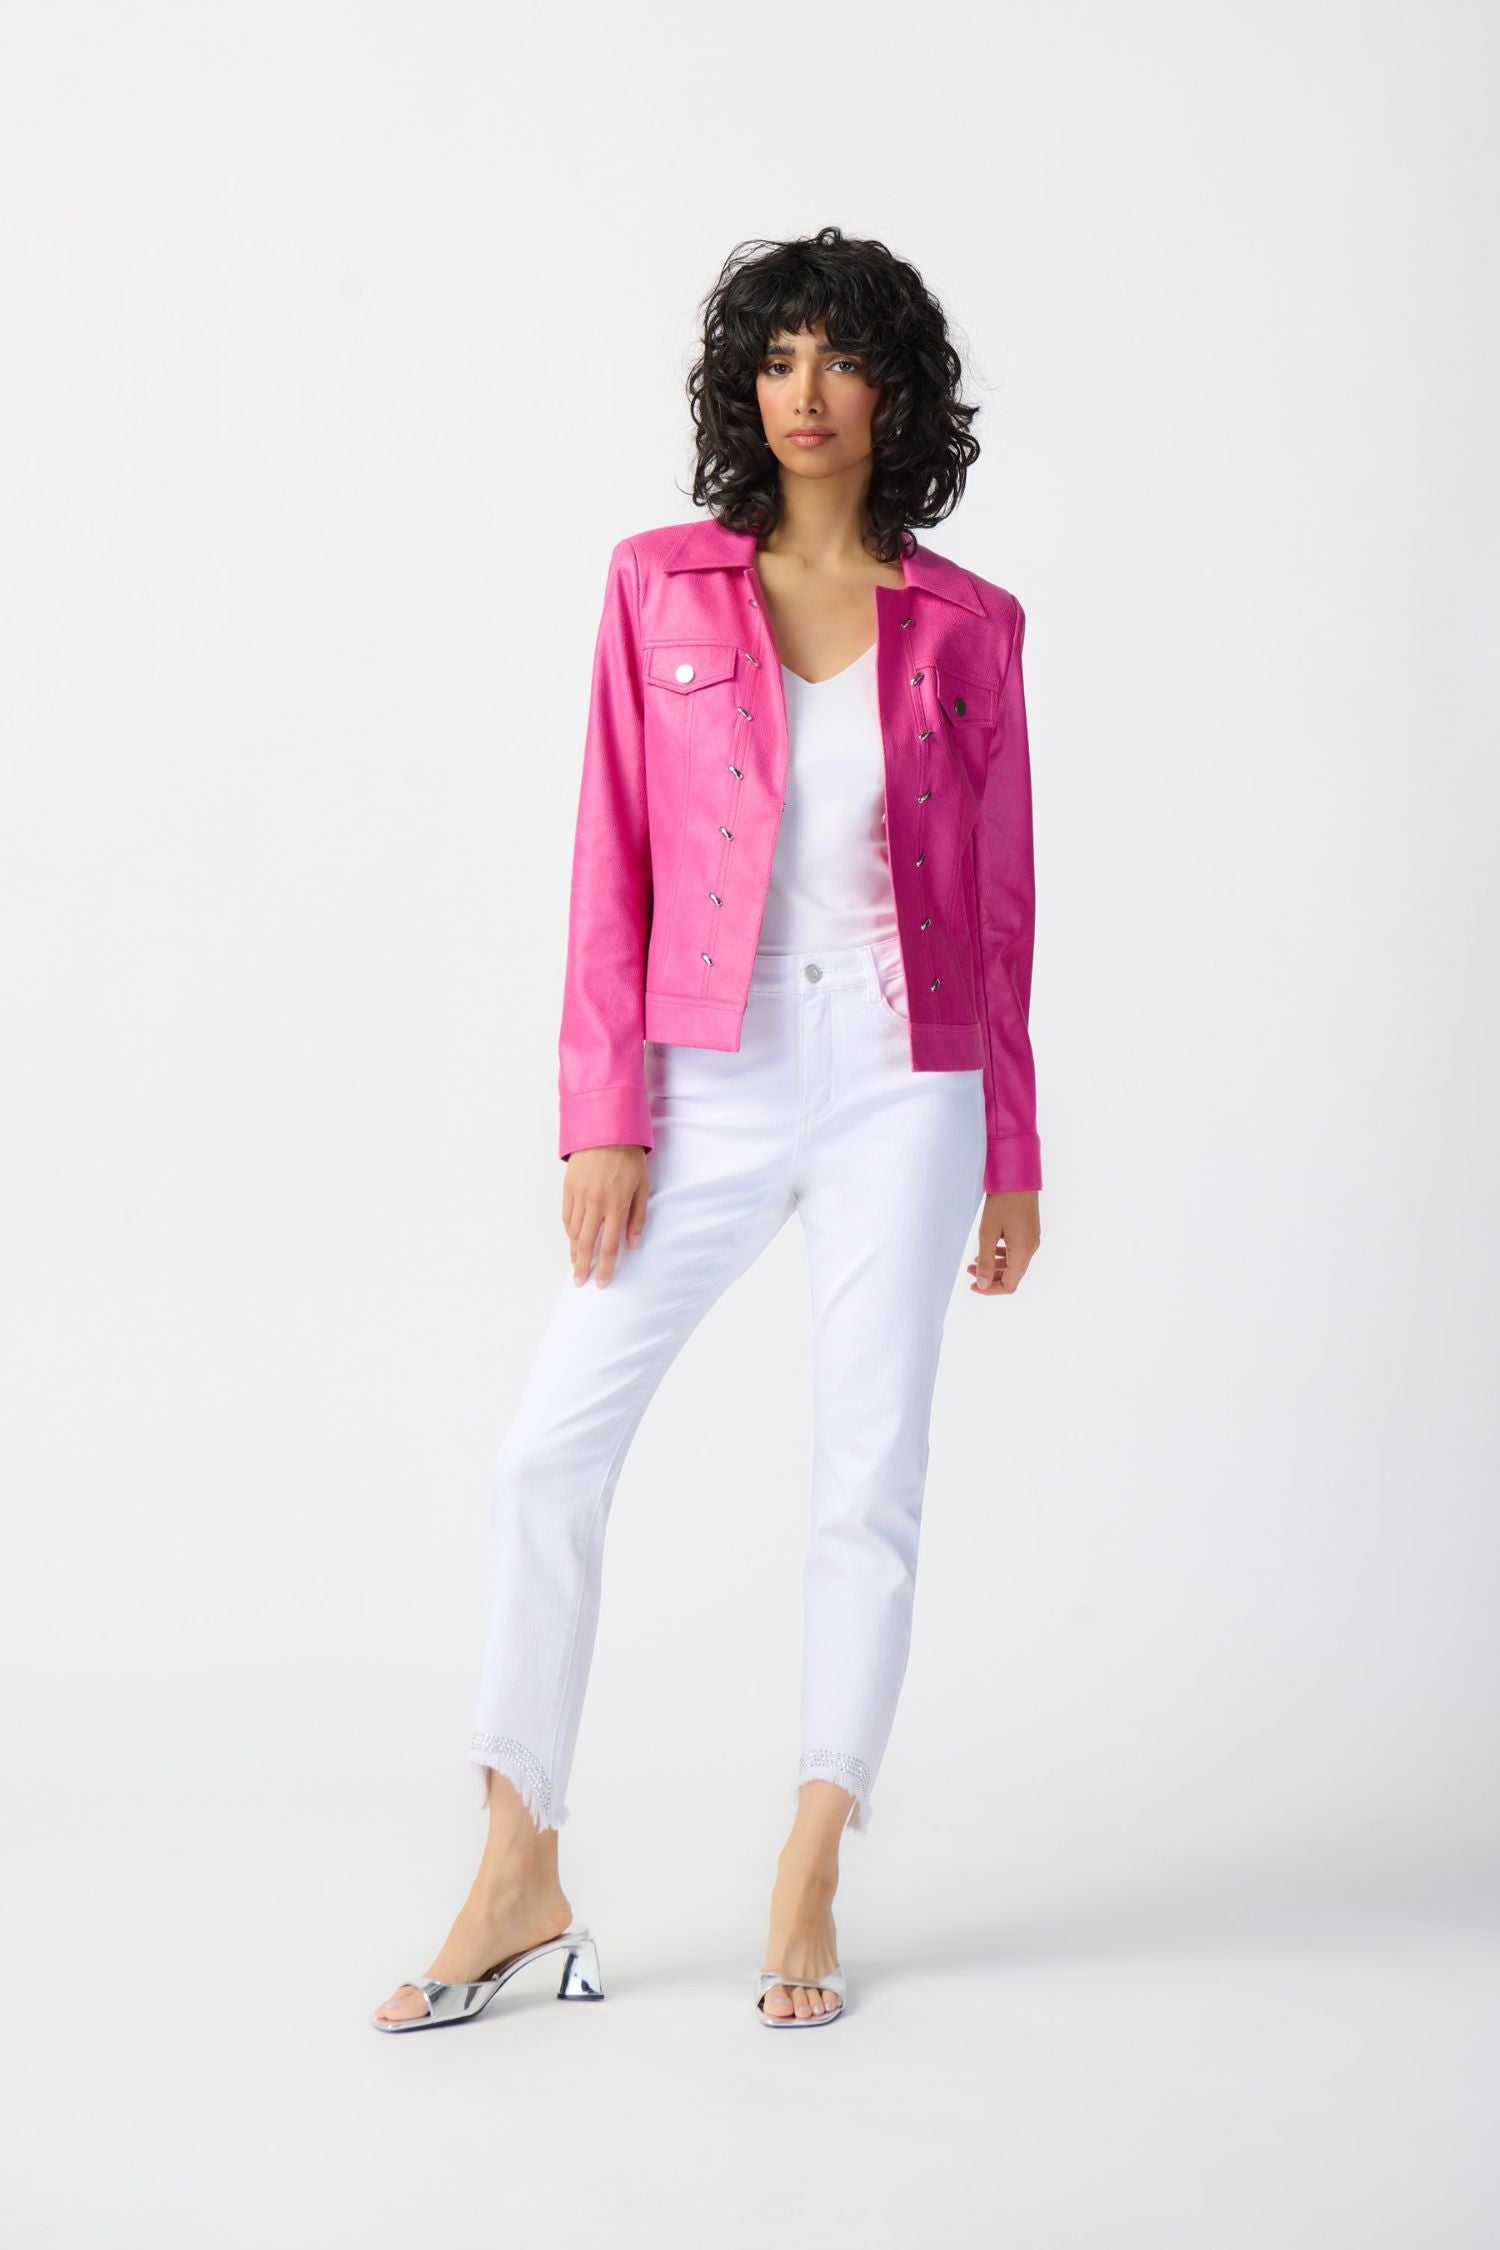 Joseph Ribkoff Foiled Suede Jacket With Metal Trims - Style 241911, front4, pink